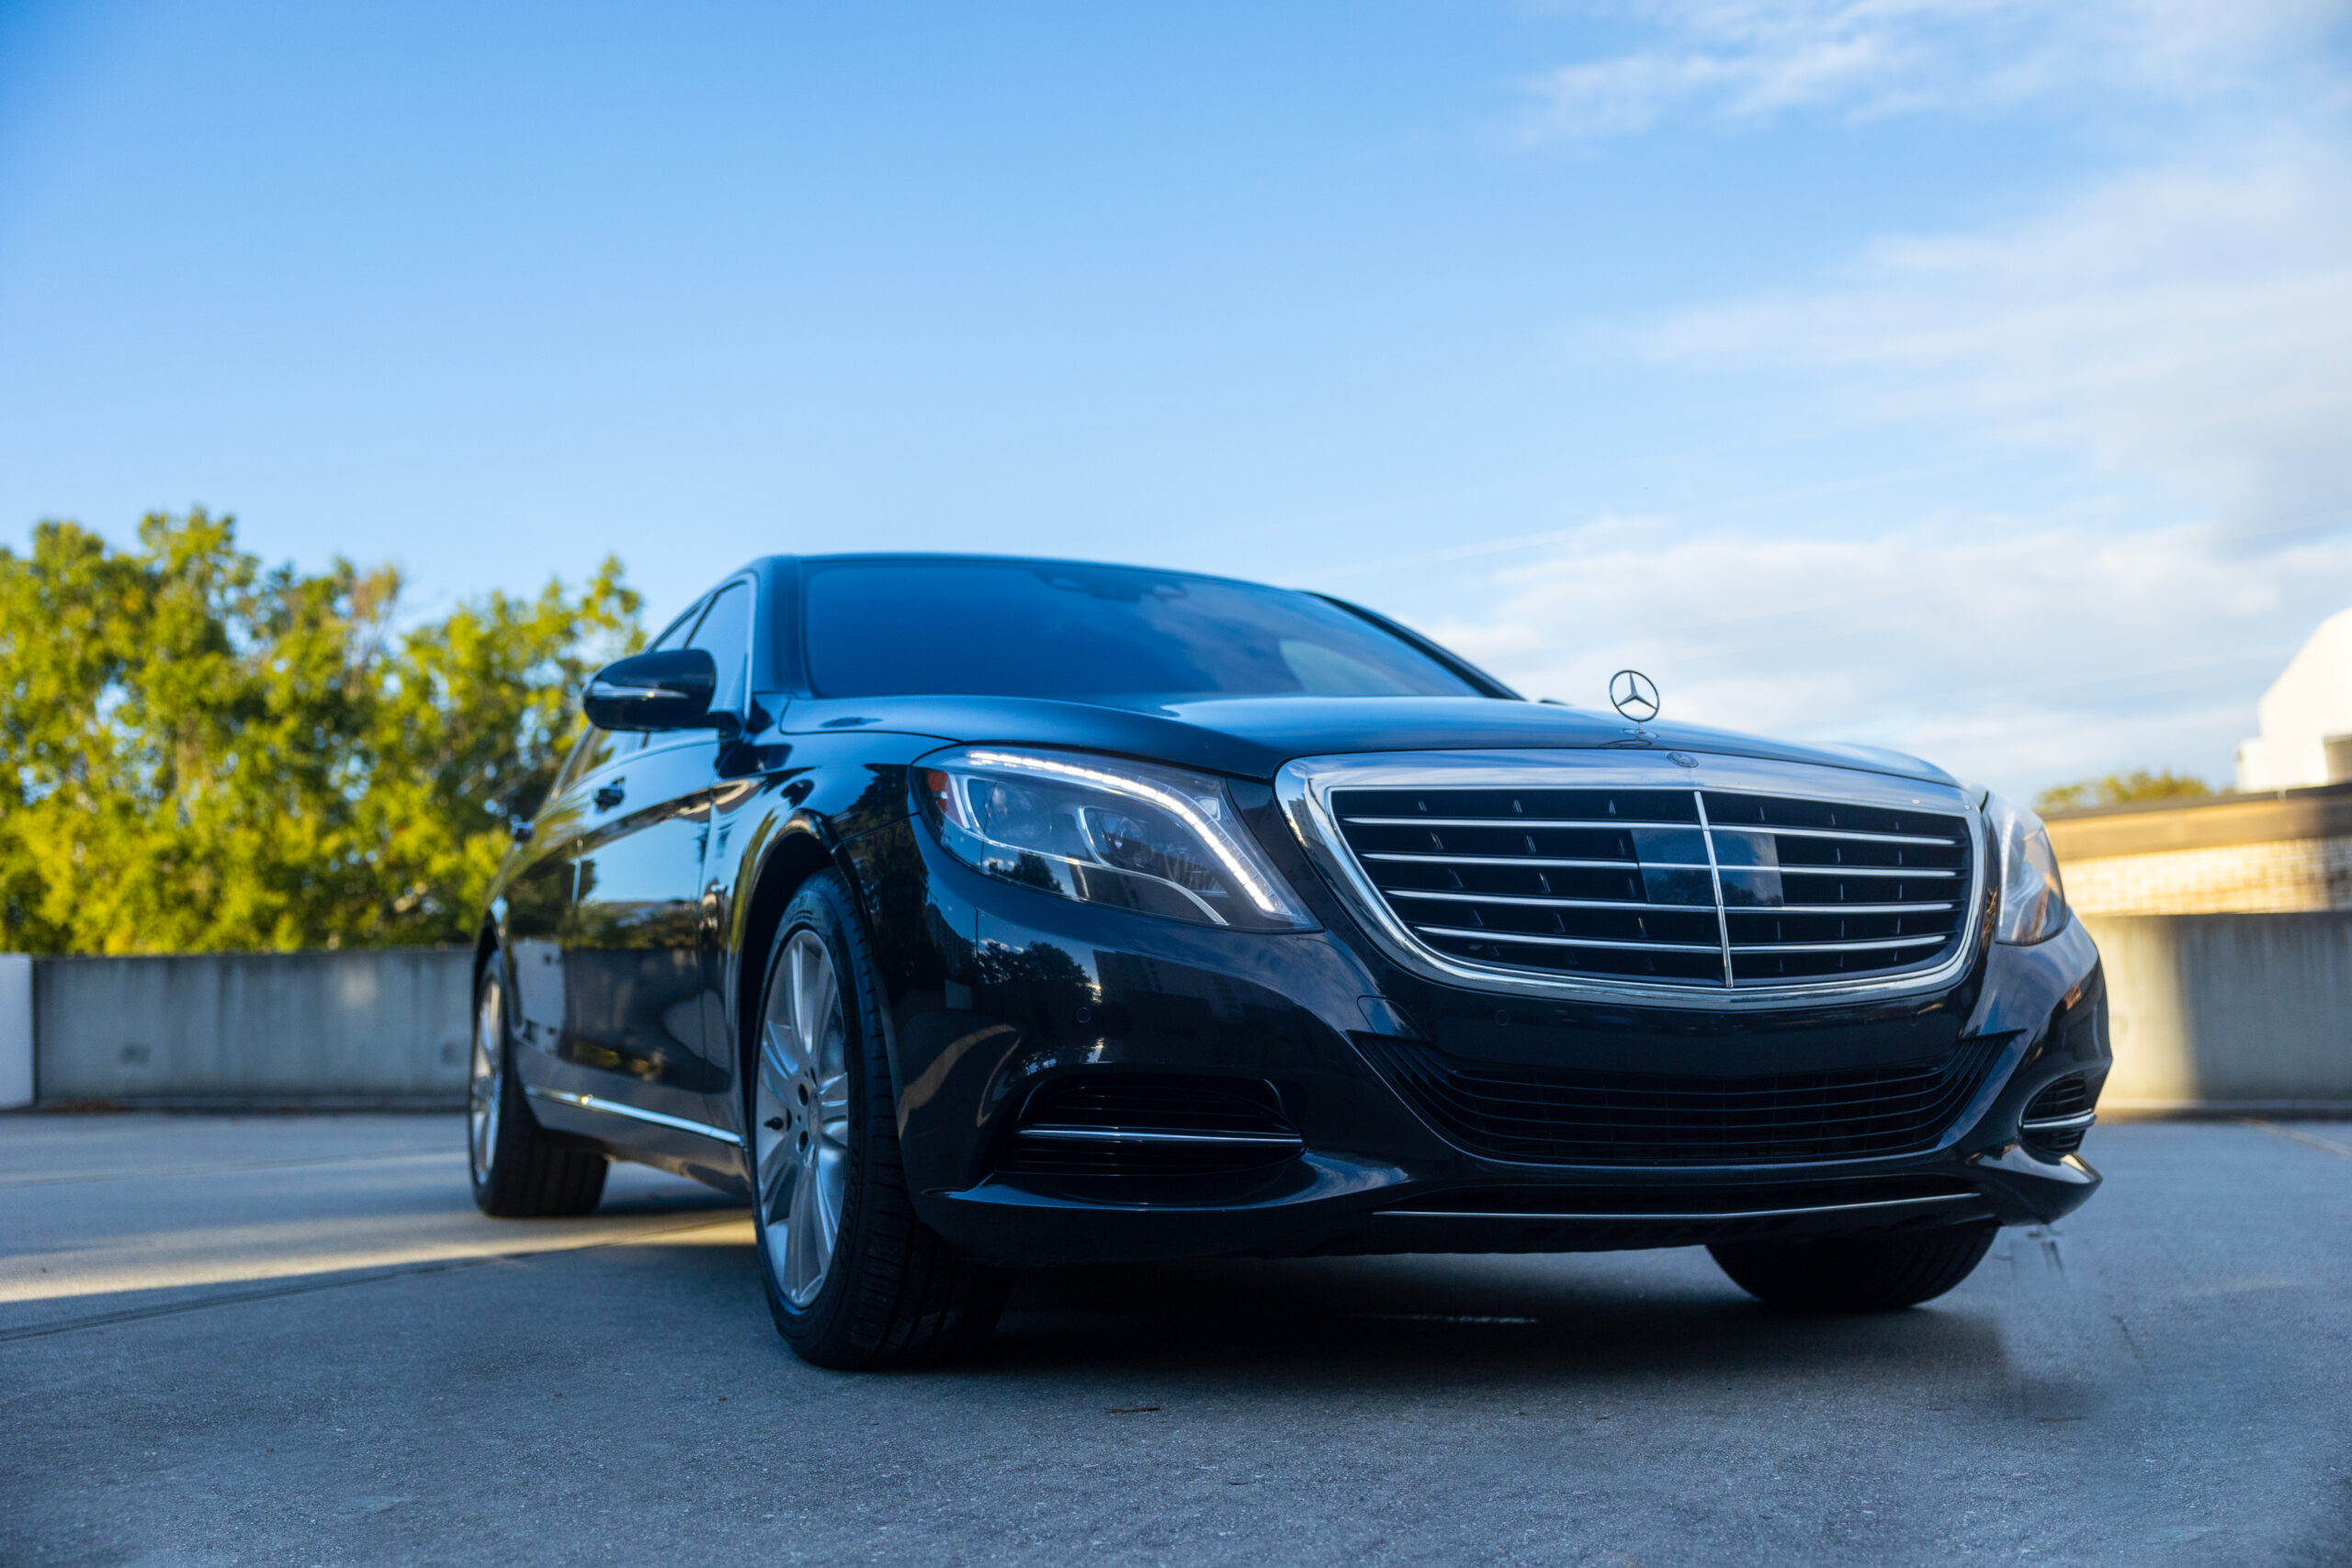 One of our Mercedes S550 Sedans, freshly cleaned and ready to go.